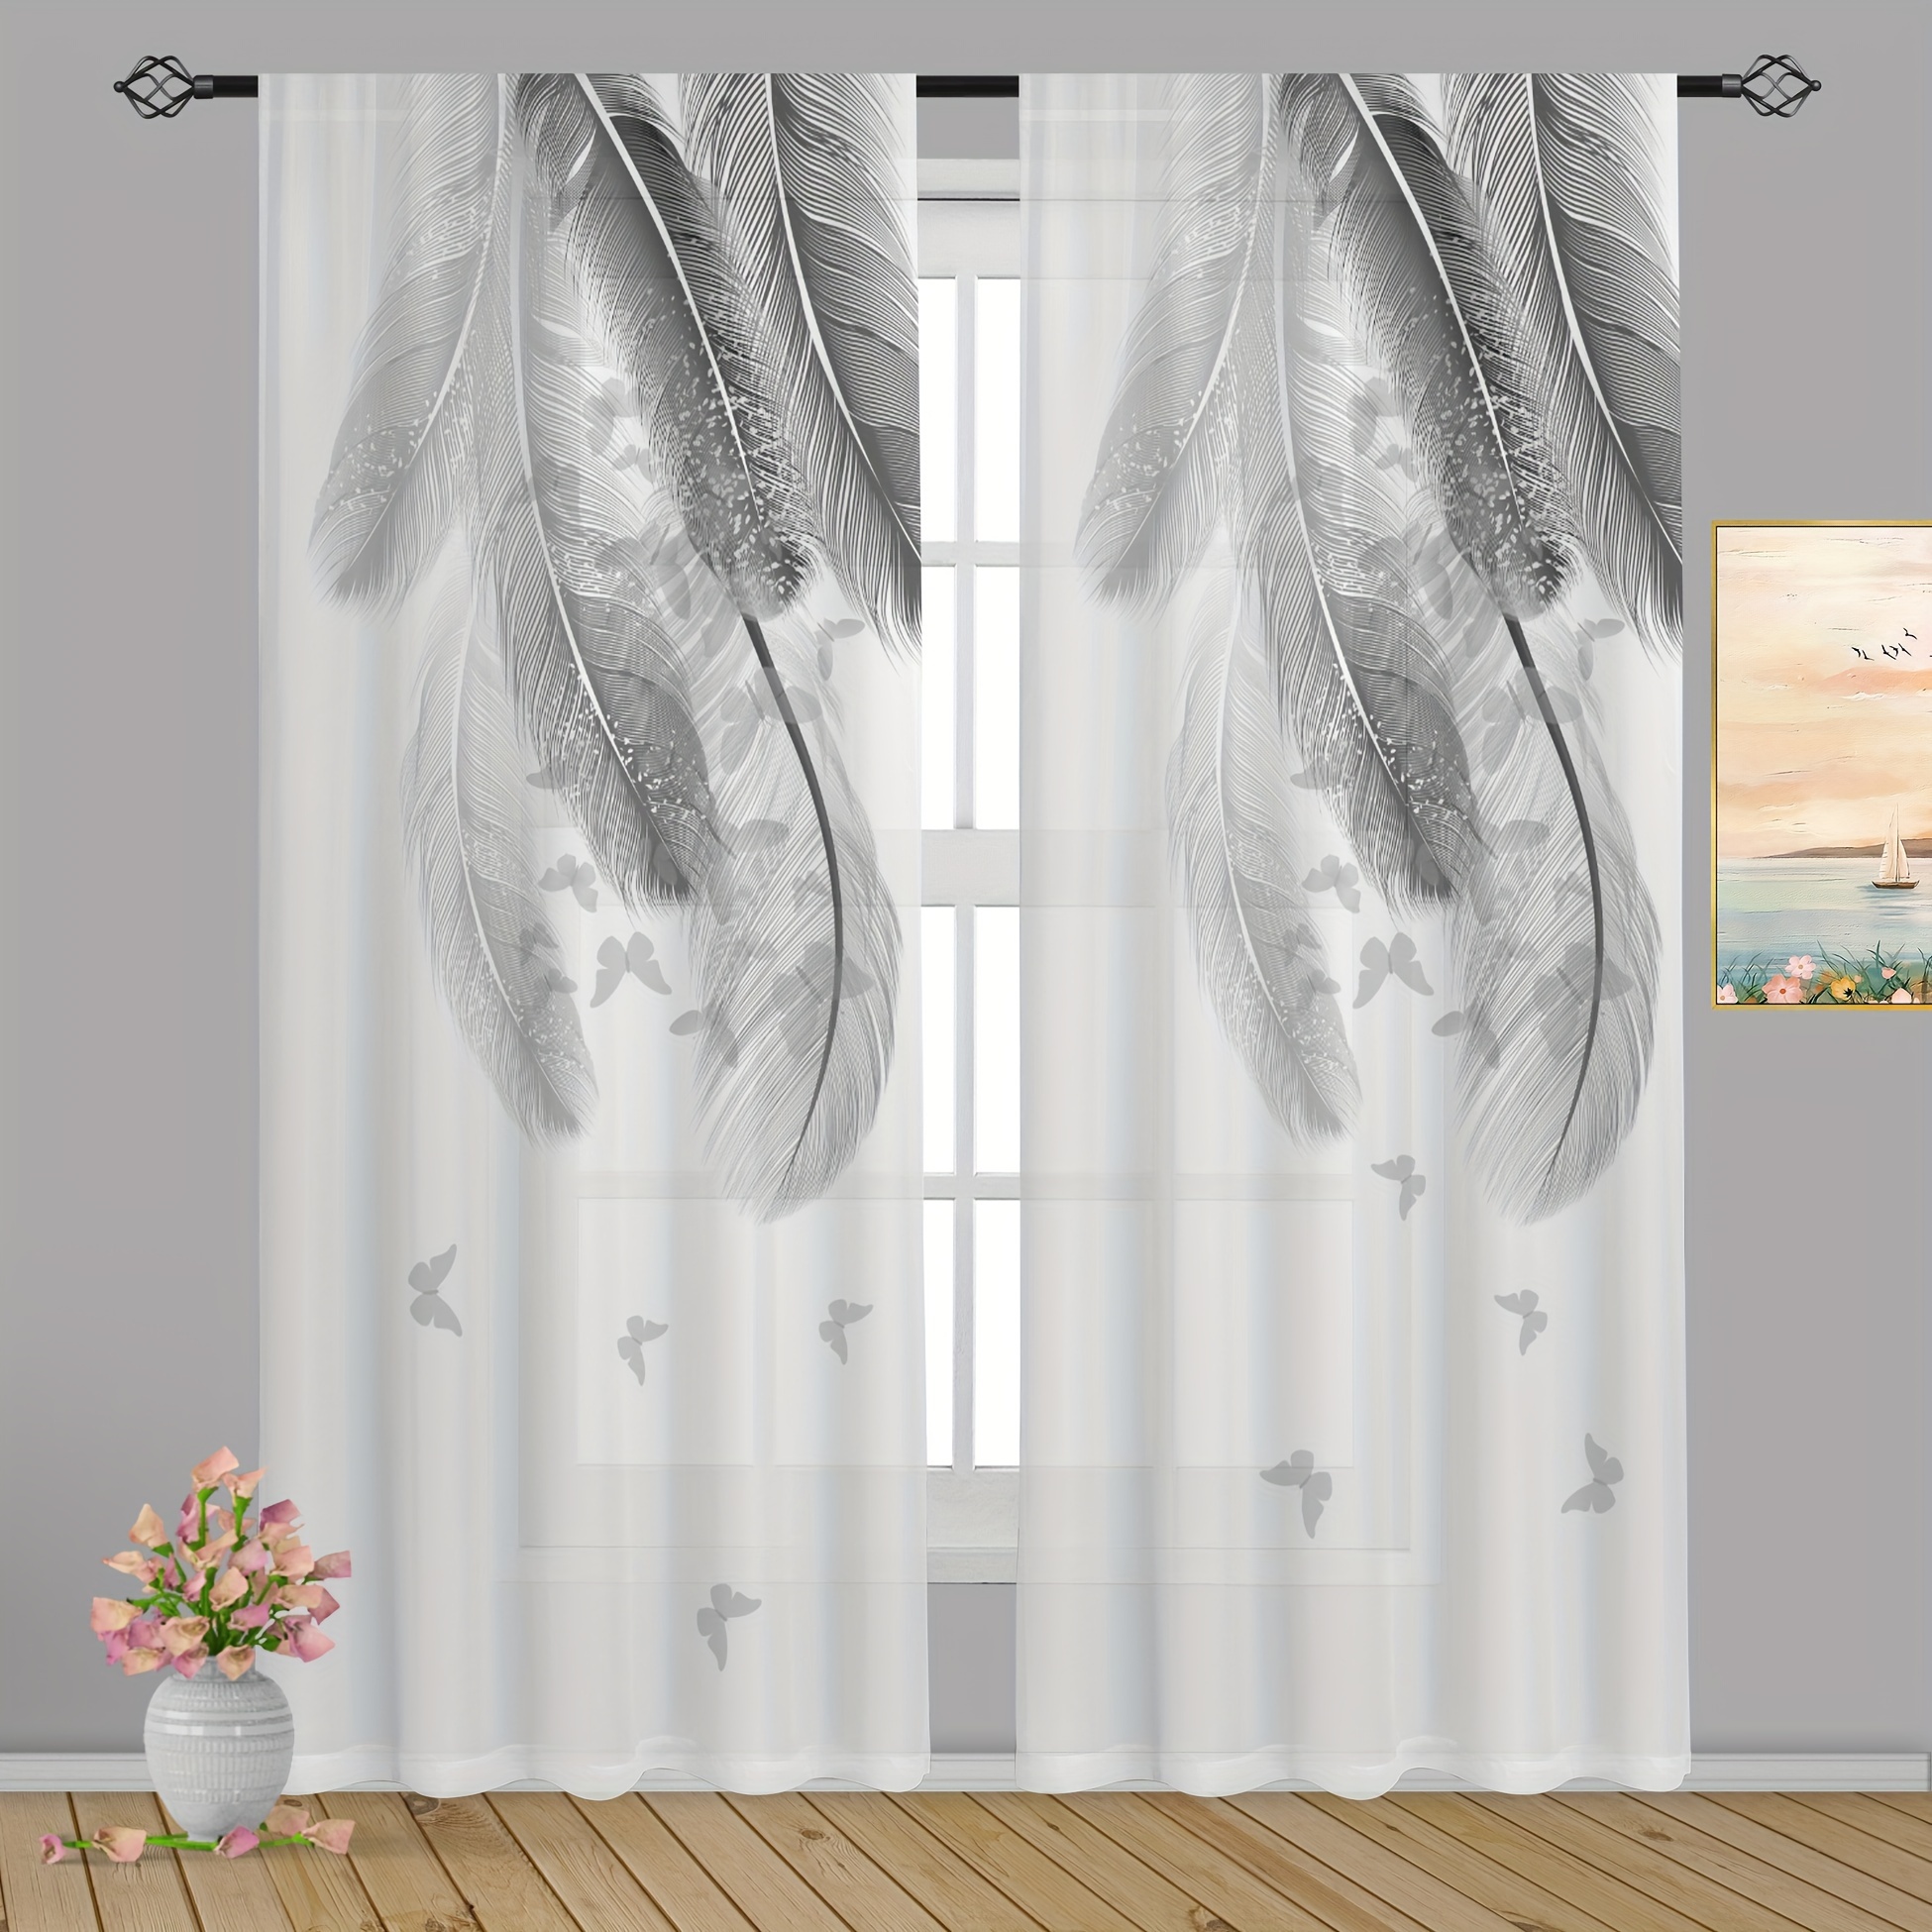 

2pcs, Gray Feather Printed Translucent Curtains, Multi-scene Polyester Rod Pocket Decorative Curtains For Living Room Game Room Bedroom Home Decor Party Supplies